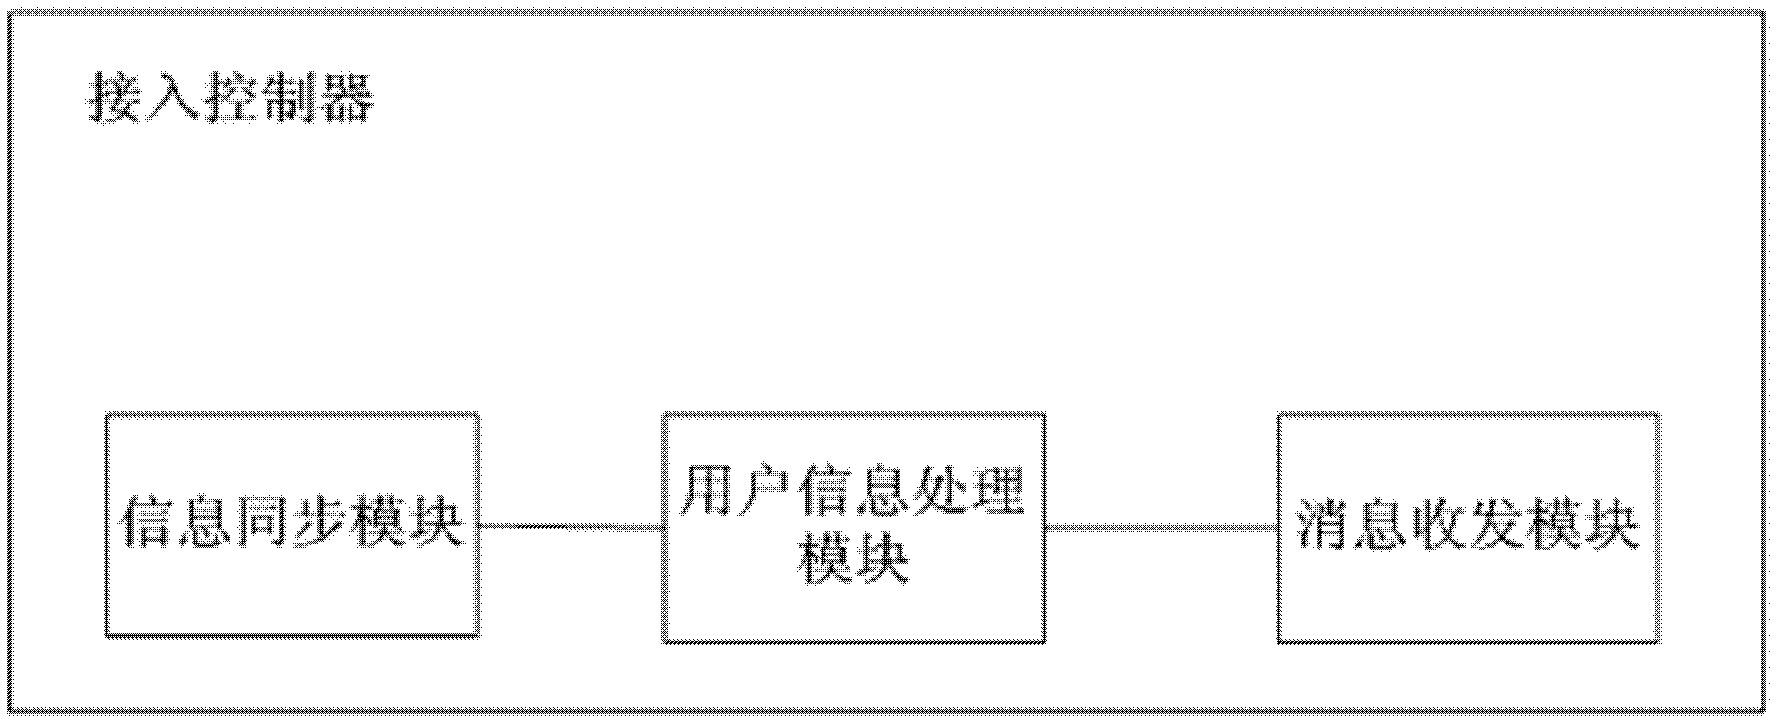 Information synchronizing method and access controller